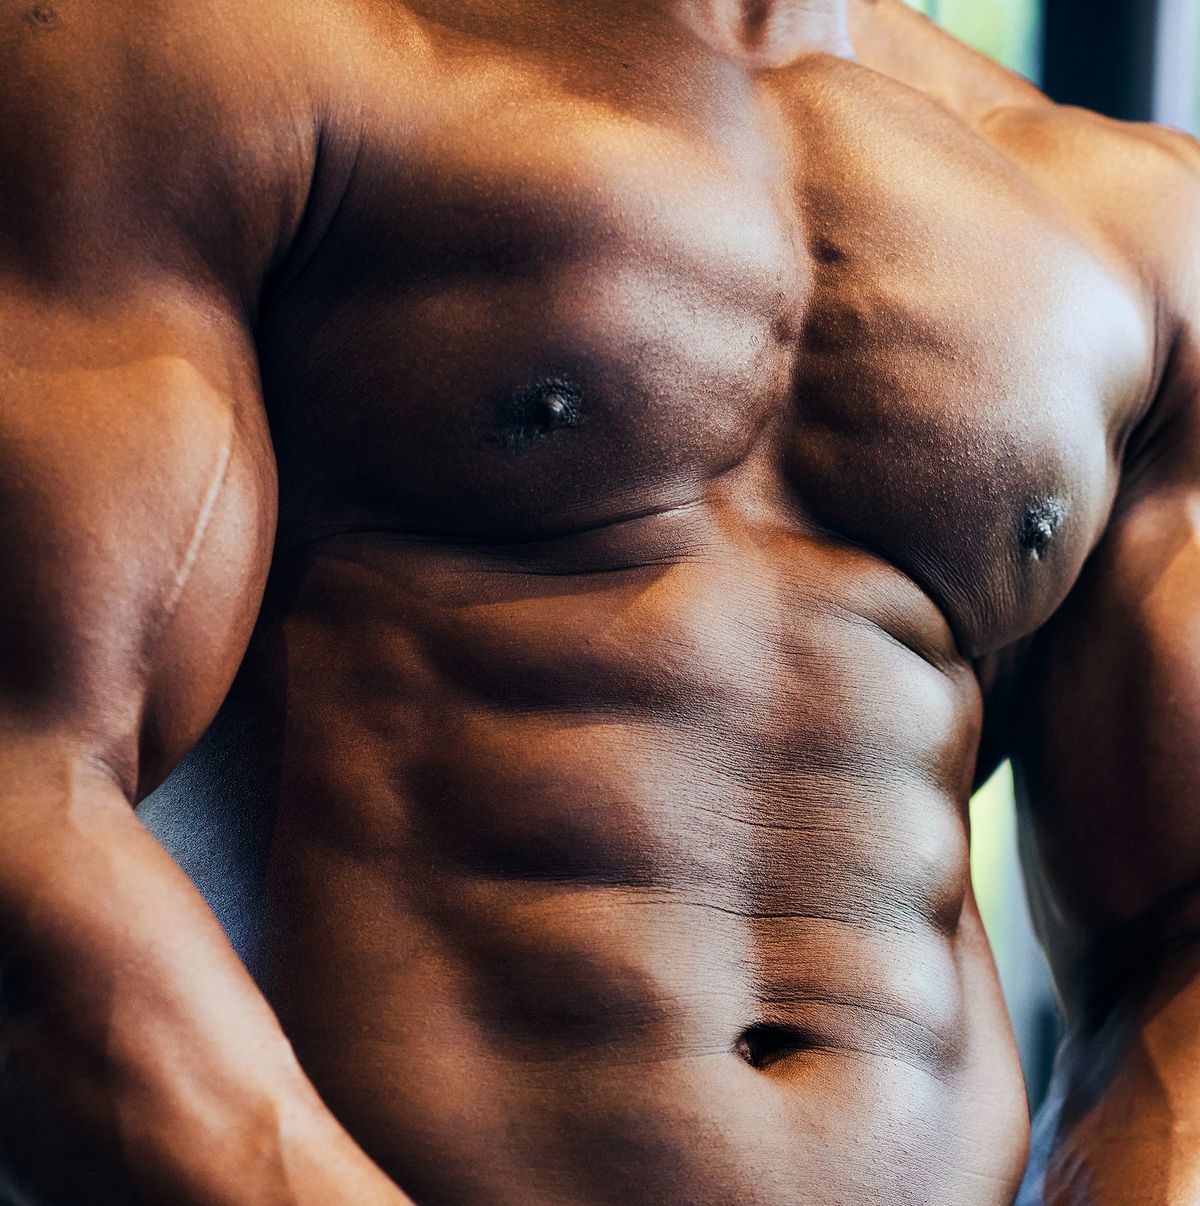 How To Flex Your Abs To Make Them Pop 